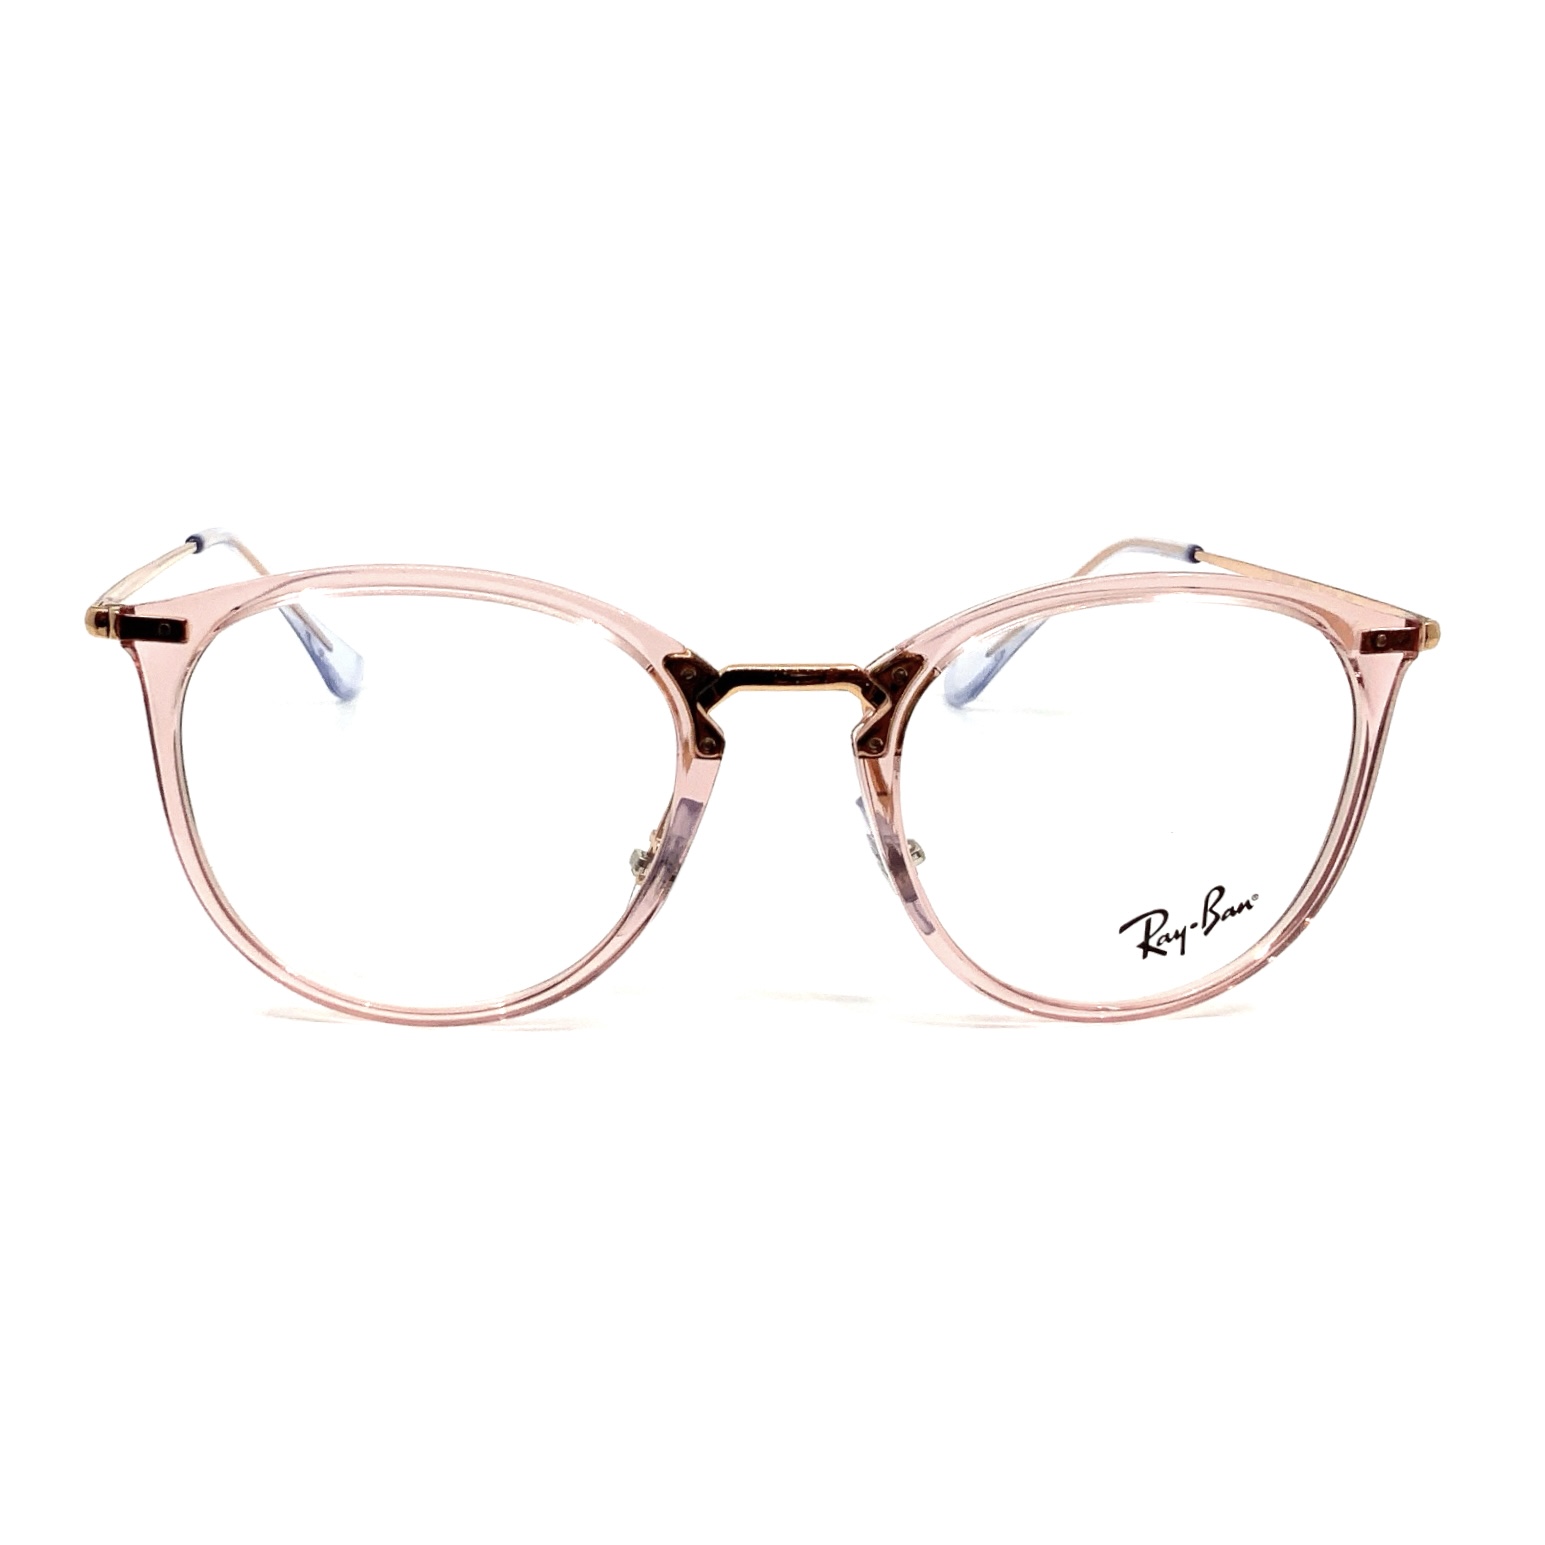 Ray-Ban レイバン メガネ RX7140 8335 polished transparent pink 49 